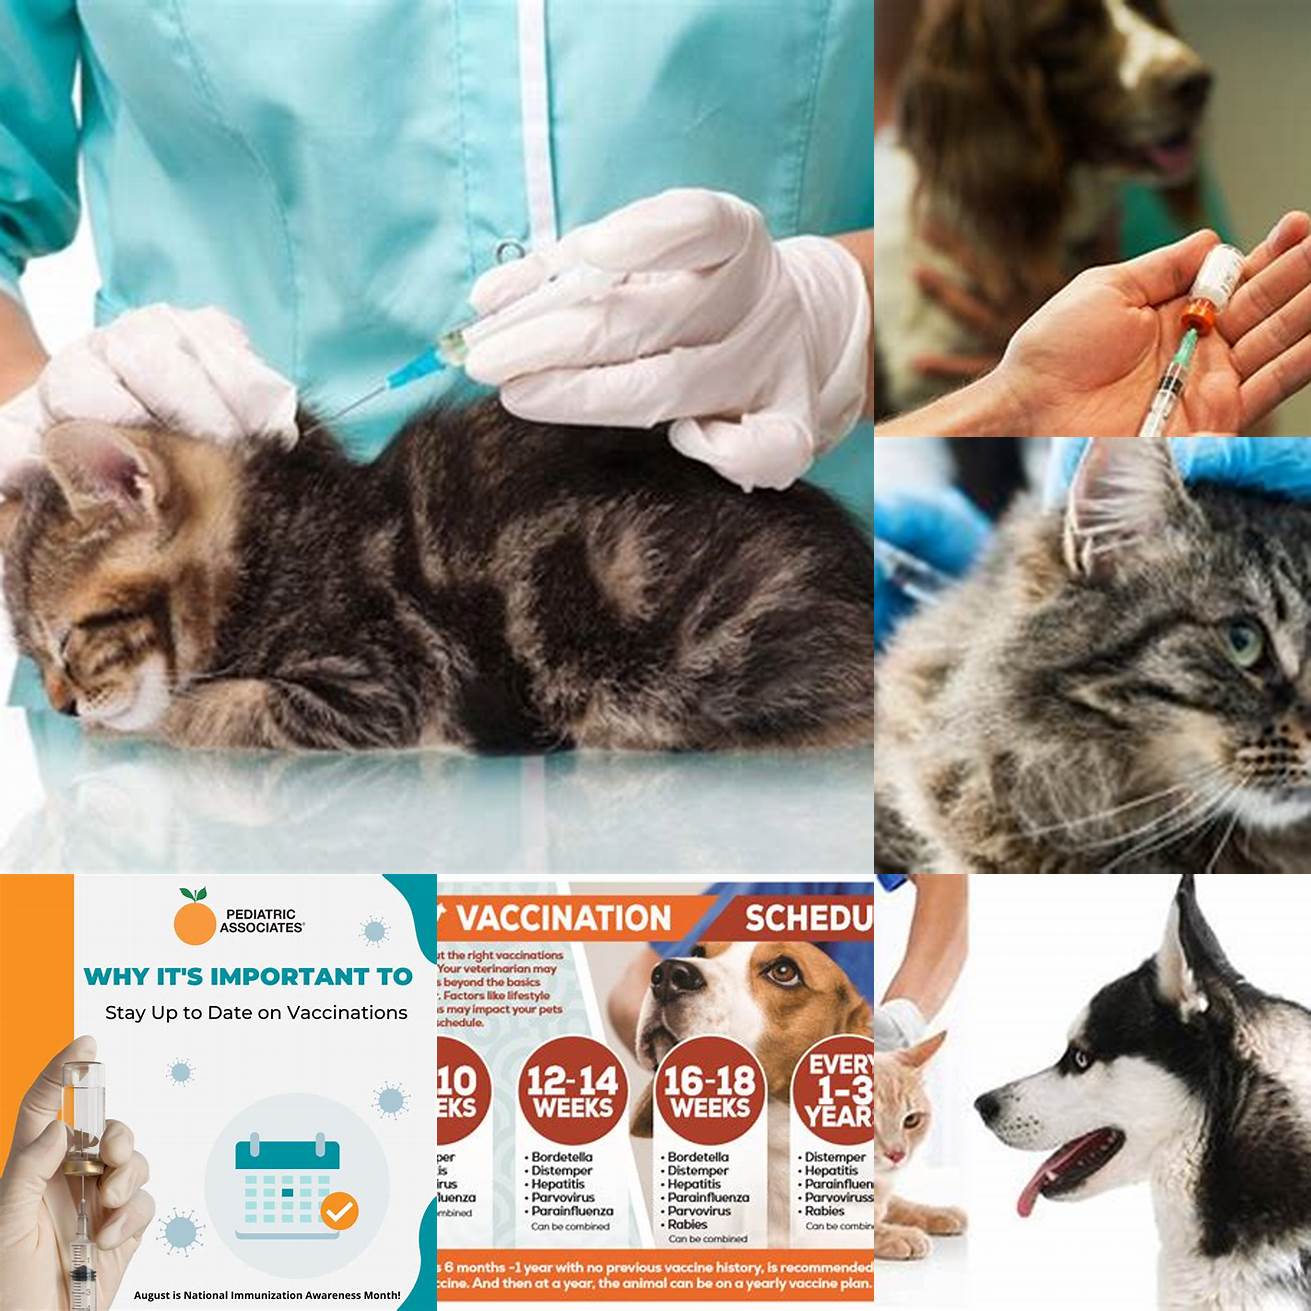 Keep your cat up-to-date on vaccinations